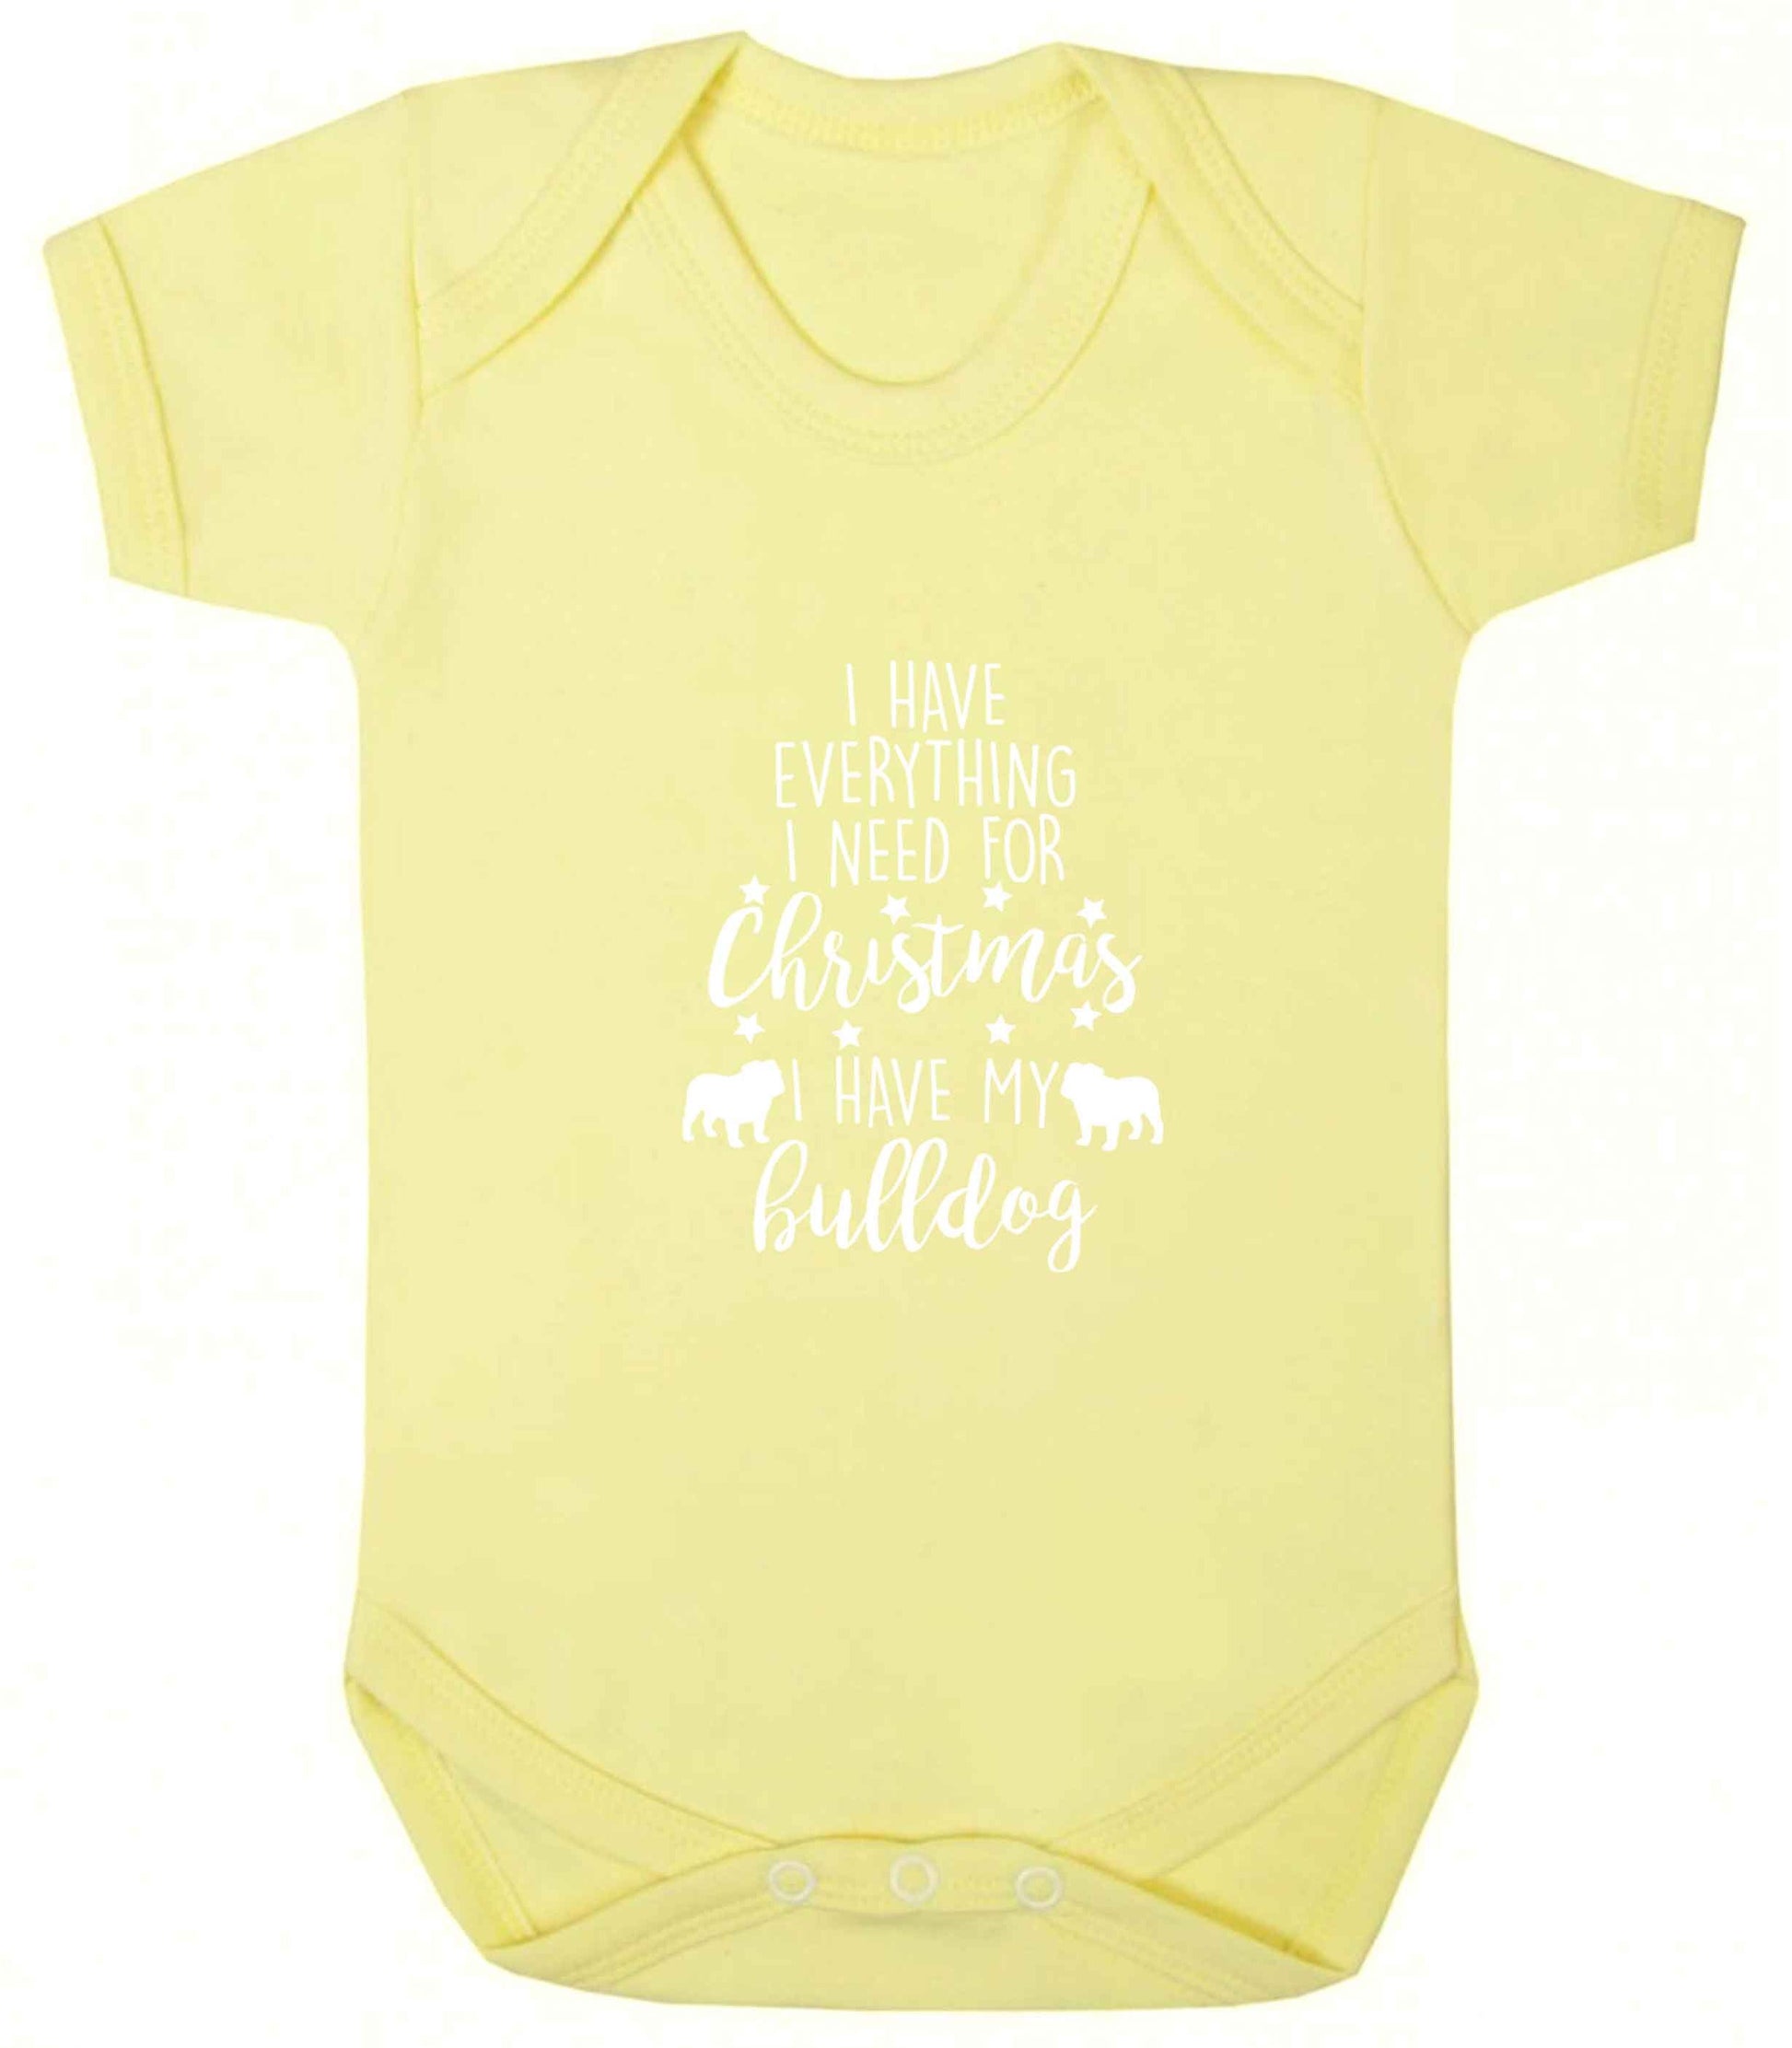 I have everything I need for Christmas I have my bulldog baby vest pale yellow 18-24 months